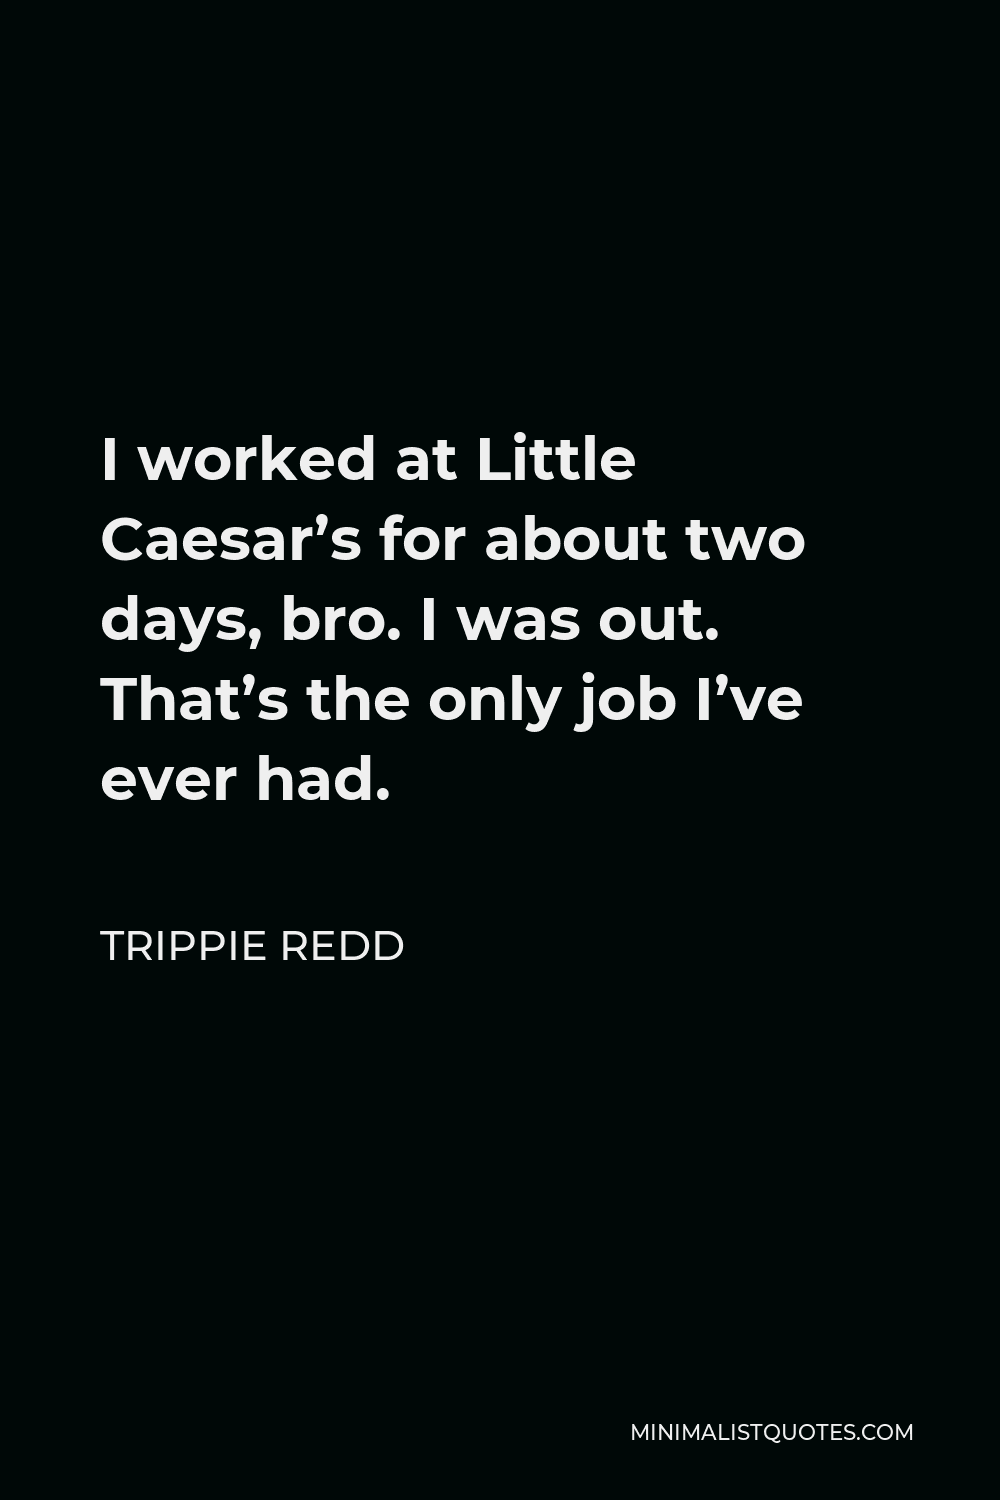 Trippie Redd Quote - I worked at Little Caesar’s for about two days, bro. I was out. That’s the only job I’ve ever had.